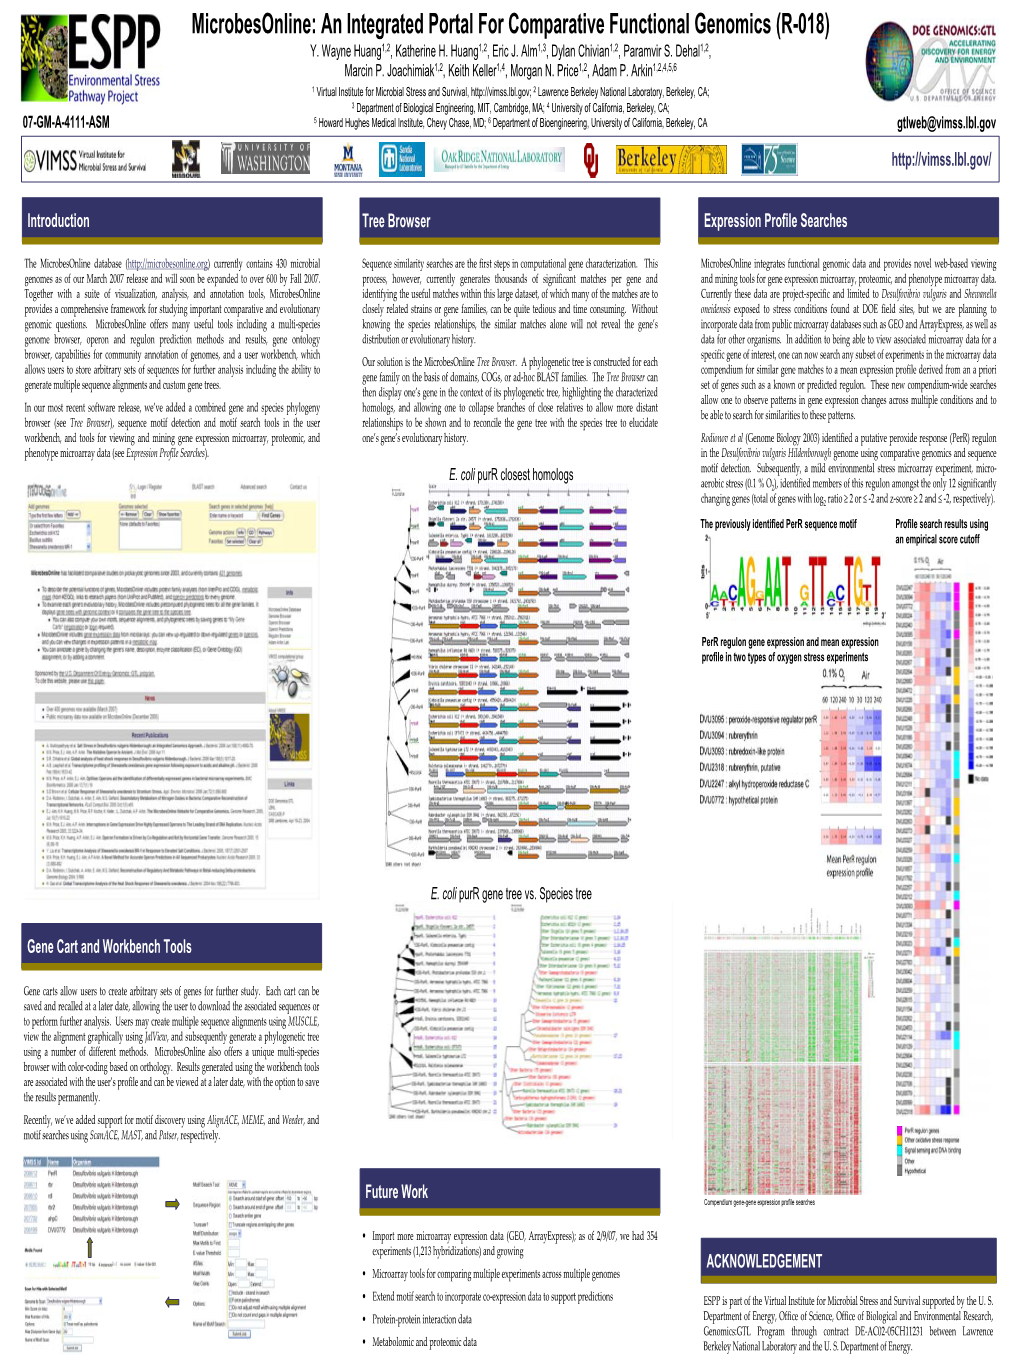 Microbesonline: an Integrated Portal for Comparative Functional Genomics (R-018) Y